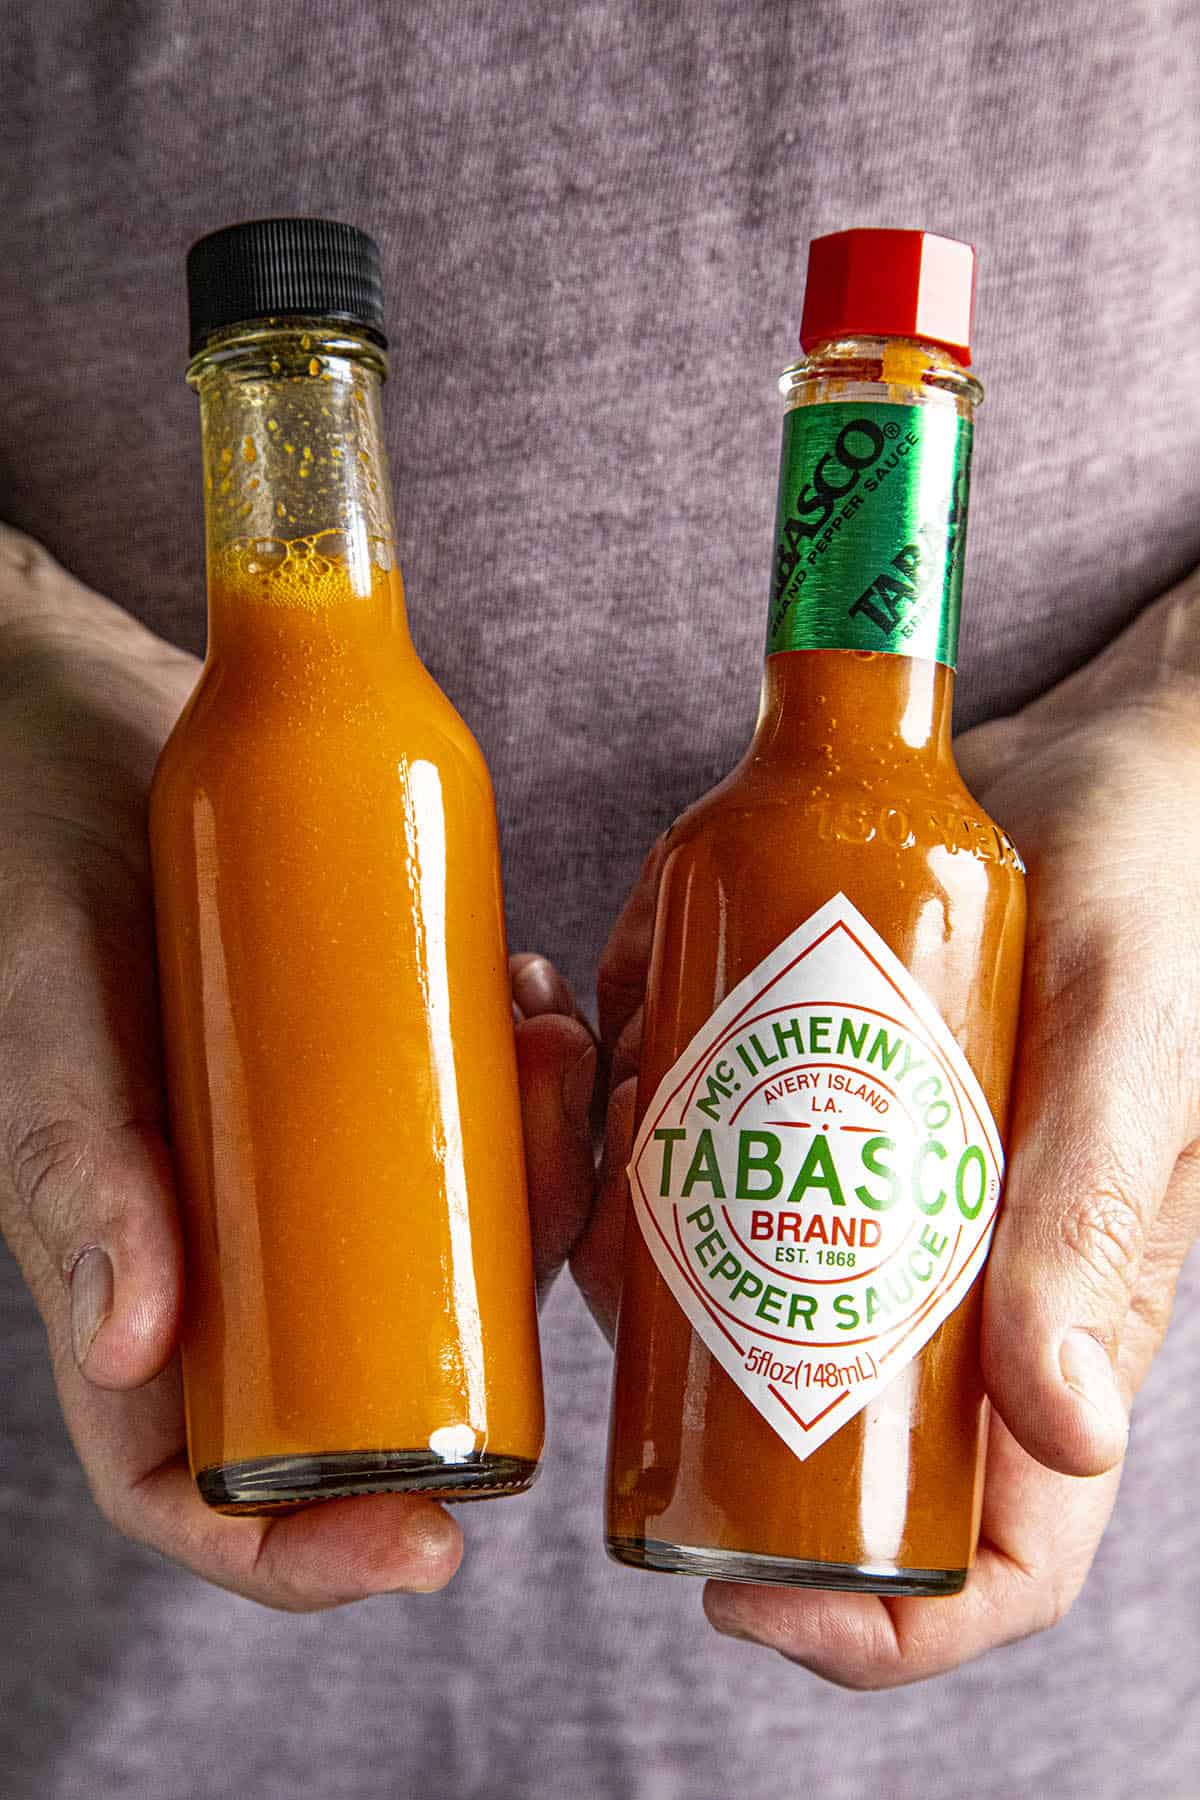 Comparing a bottle of store bought Tabasco Sauce with my Homemade Tabasco Sauce